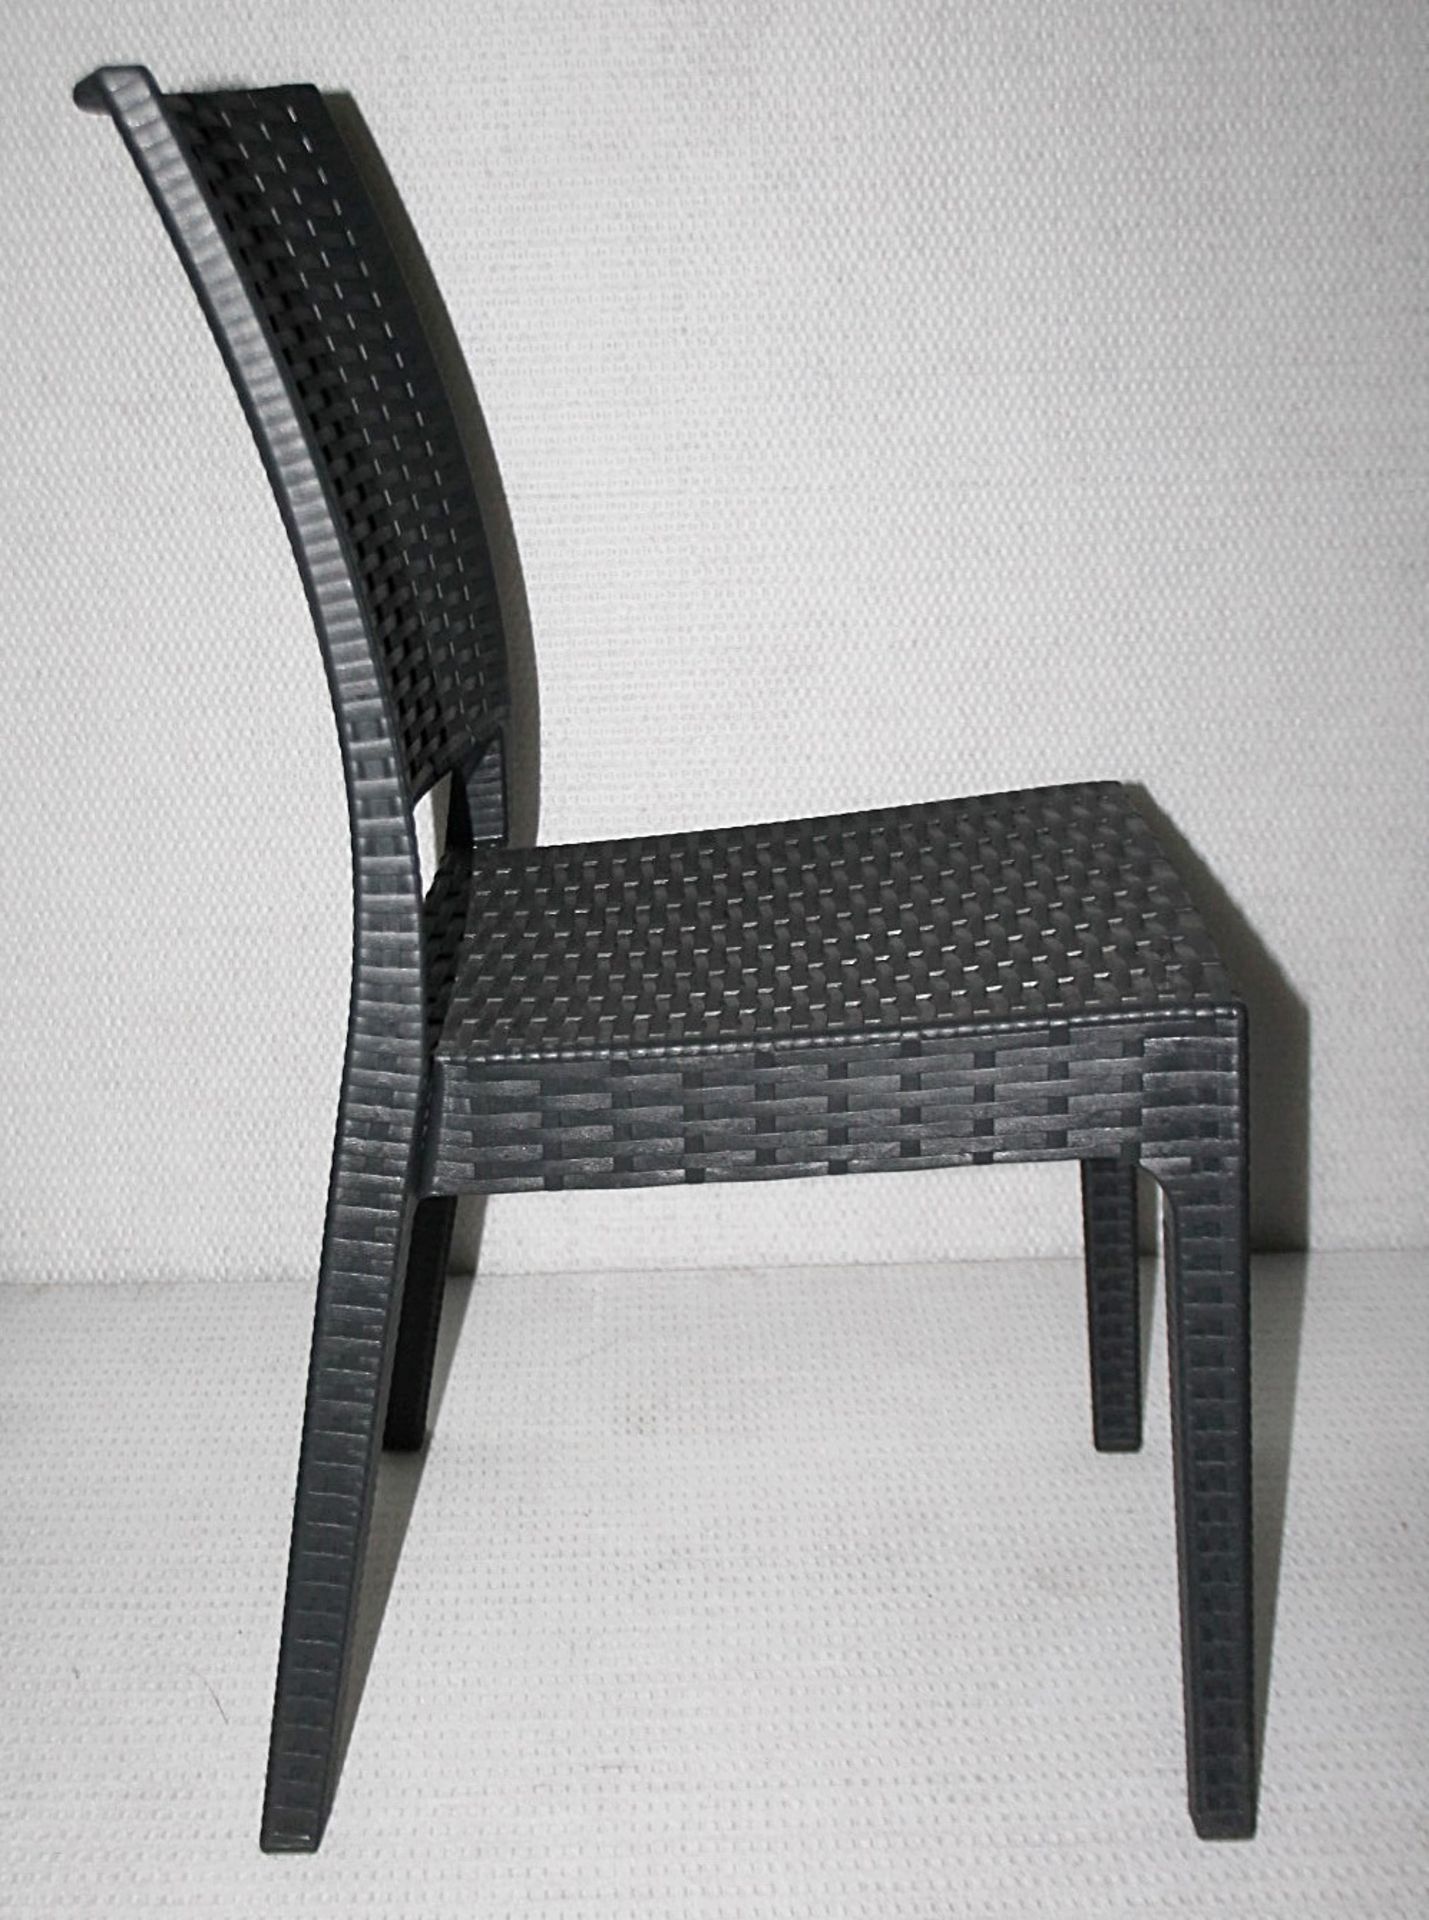 4 x SIESTA EXCLUSIVE 'Florida' Commercial Stackable Rattan-style Chairs In Dark Grey -CL987 - - Image 9 of 13